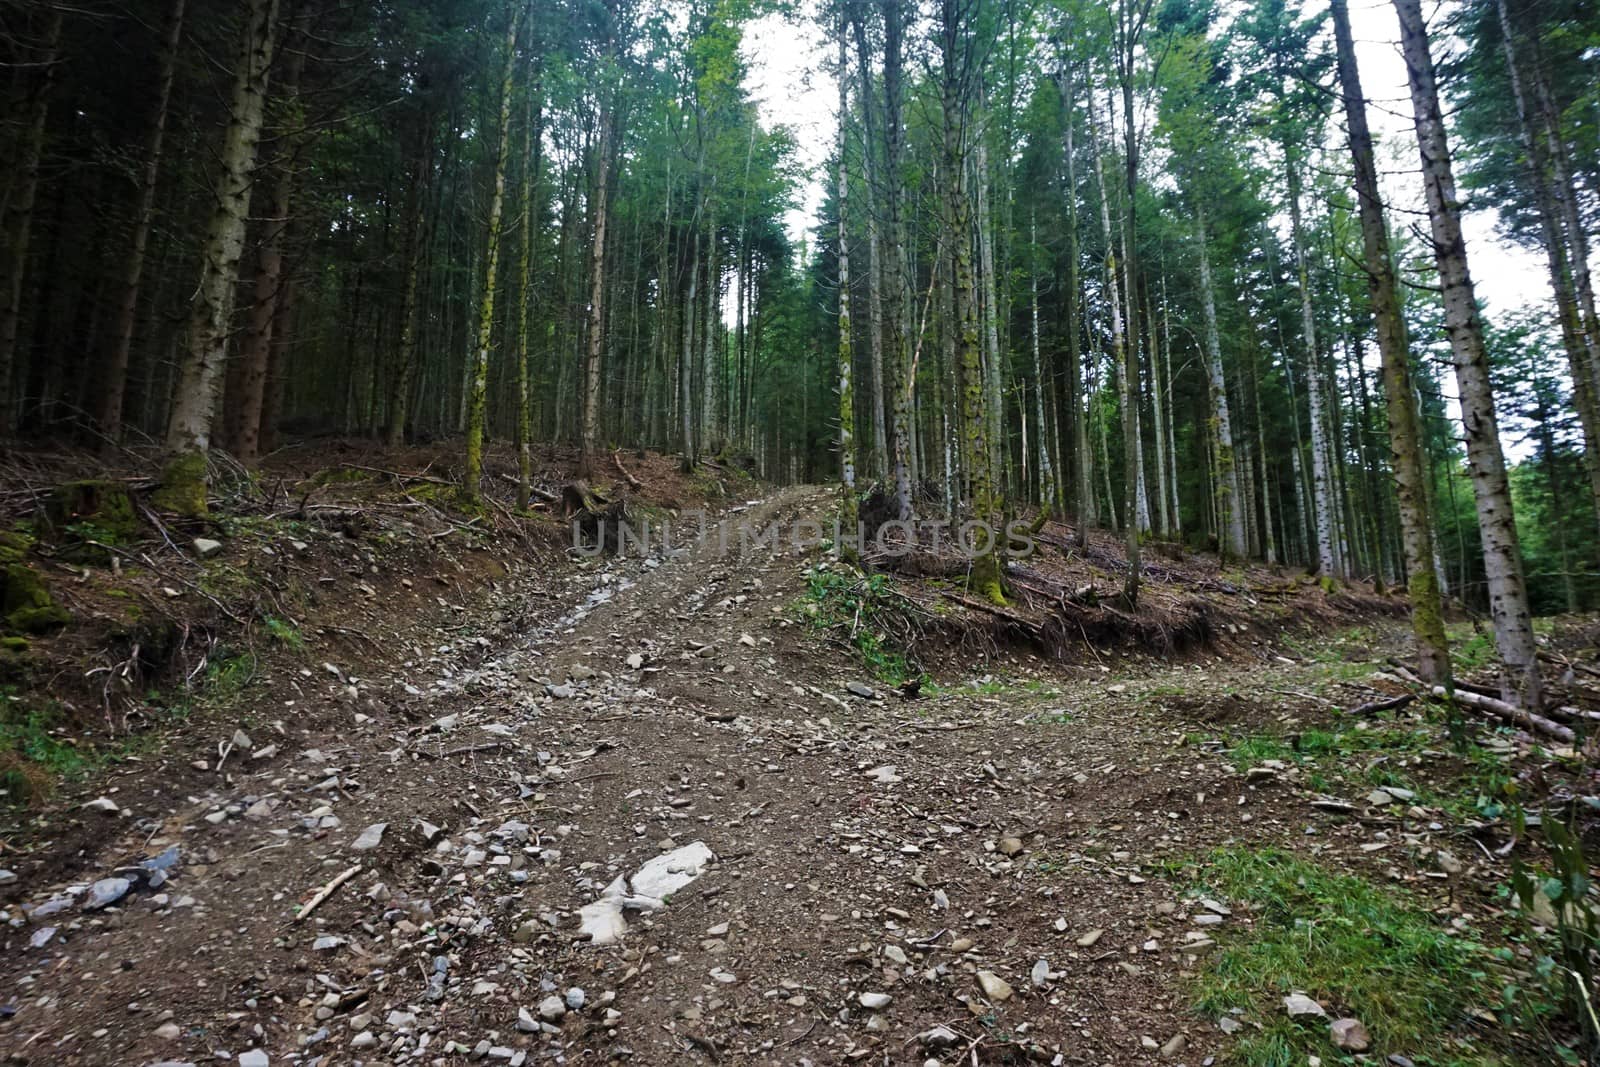 Dirt road through the forest in the Vosges near Markstein mountain by pisces2386